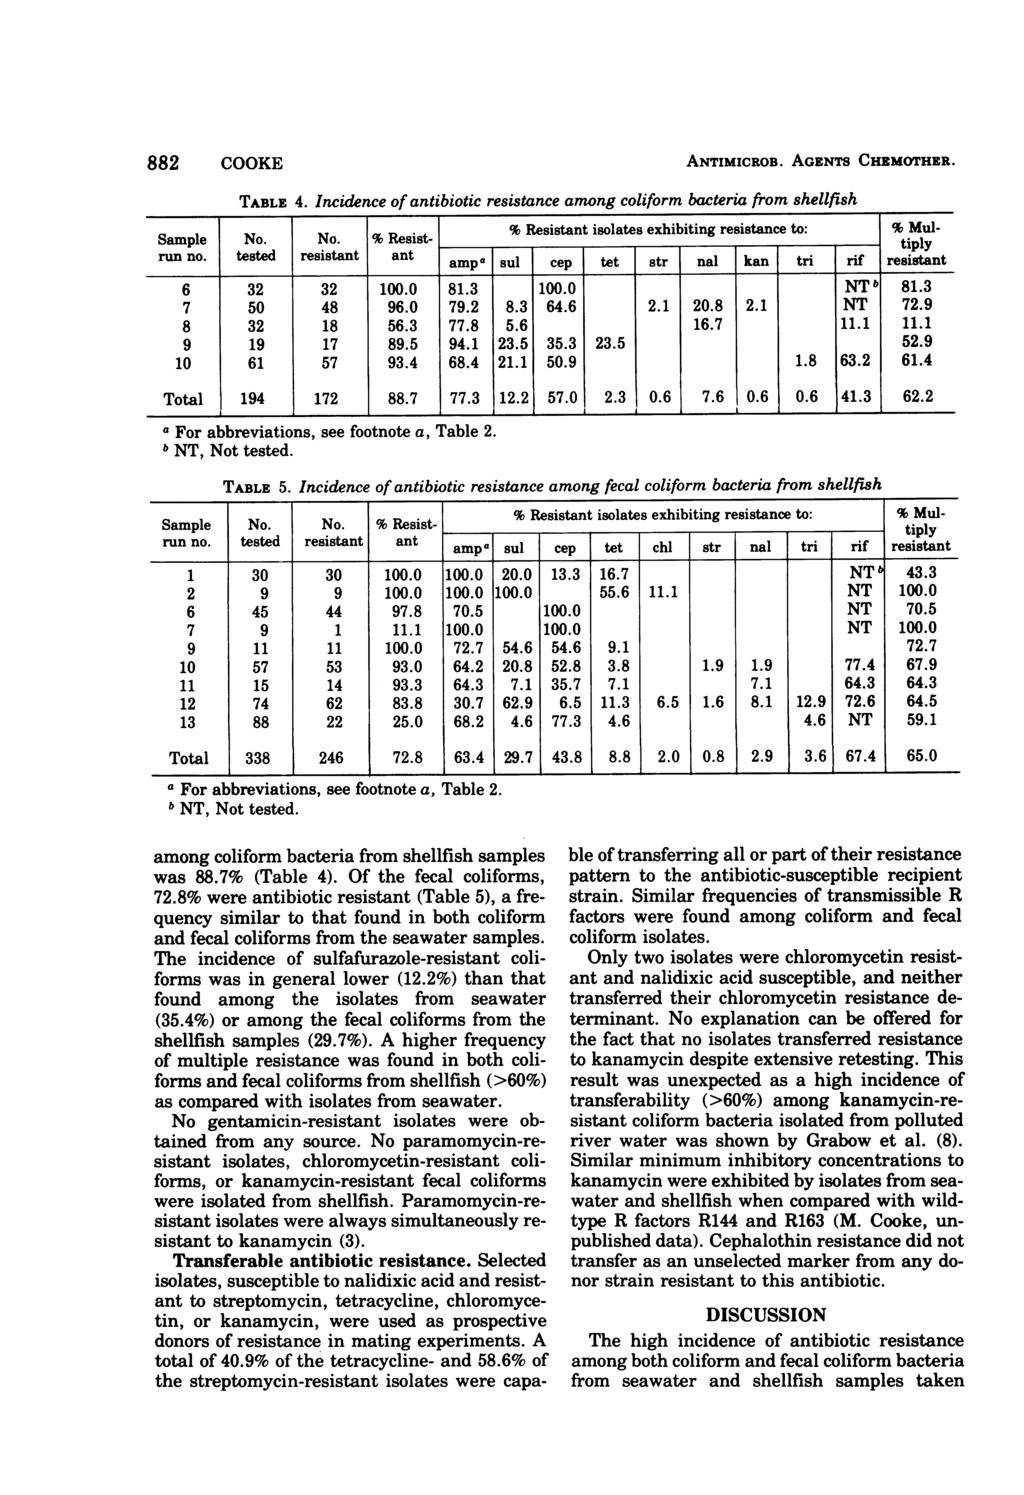 882 COOKE TABLE 4. Incidence of ntibiotic resistnce mong coliform bcteri from shellfish Smple No. No. % Resist- % Resistnt isoltes exhibiting resistnce to: % Mulrun no.